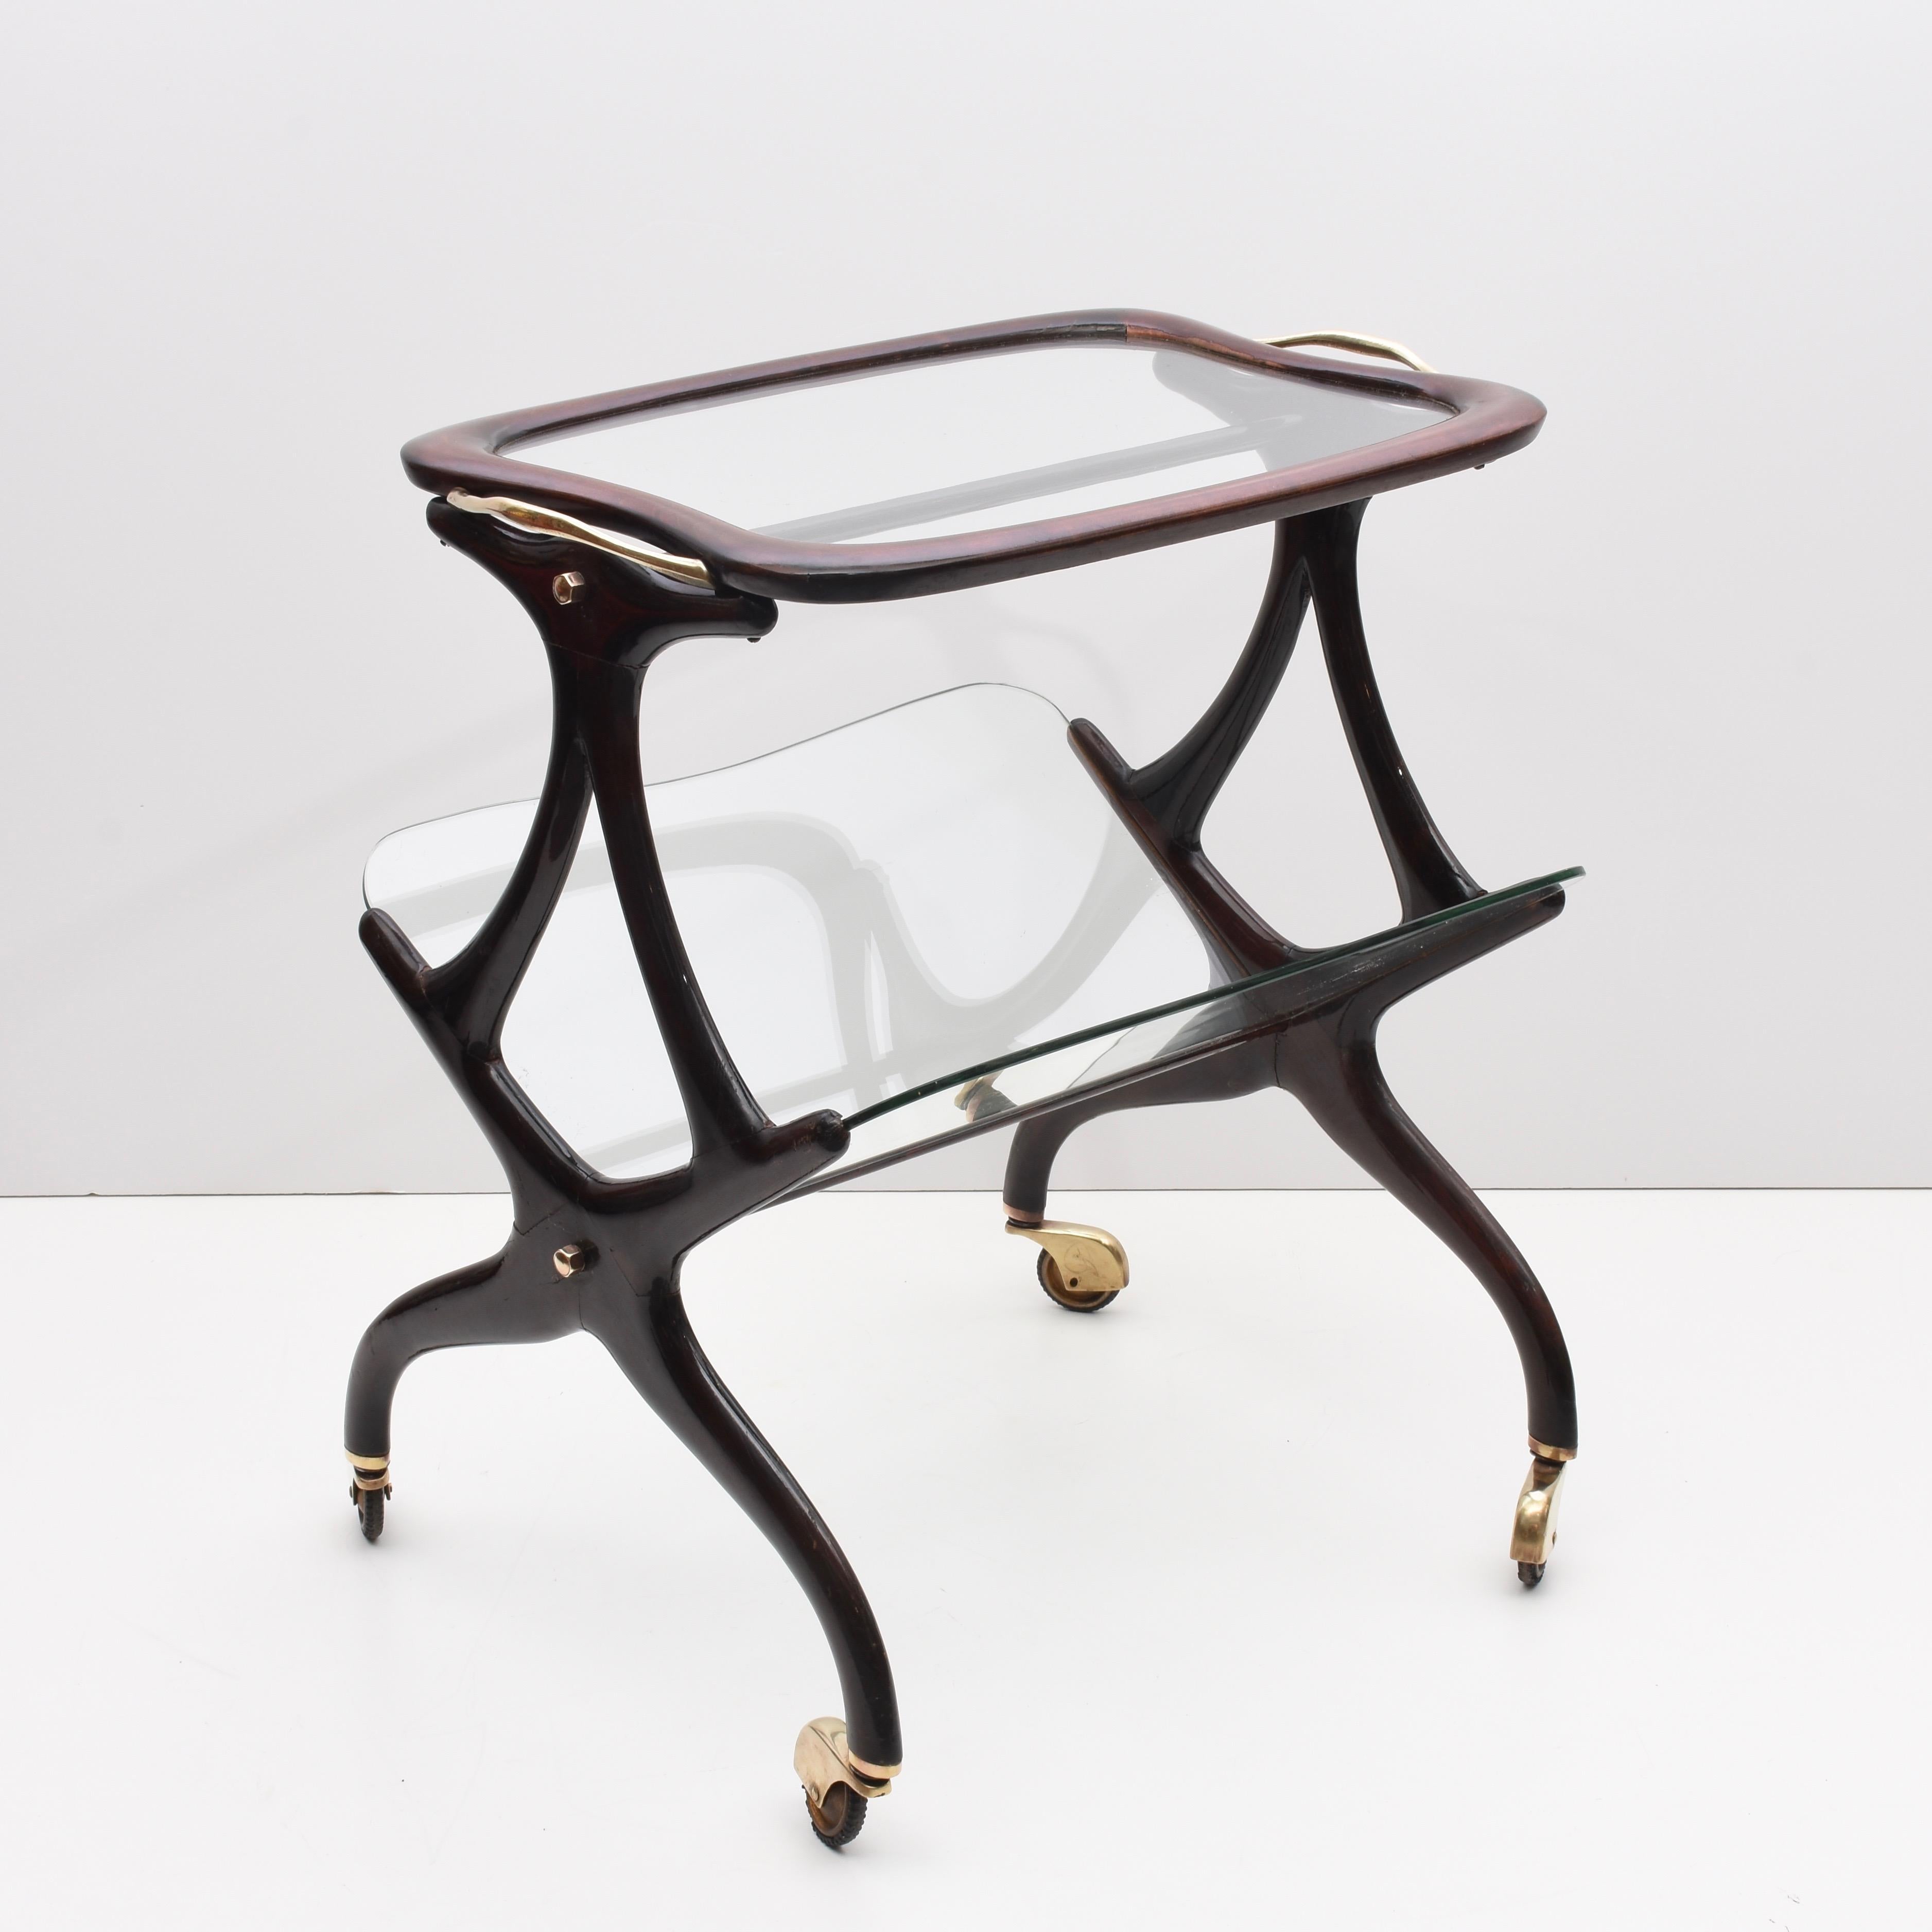 Glass Cesare Lacca Mid-Century Modern Wood Magazine Rack and Bar Cart, 1950s For Sale